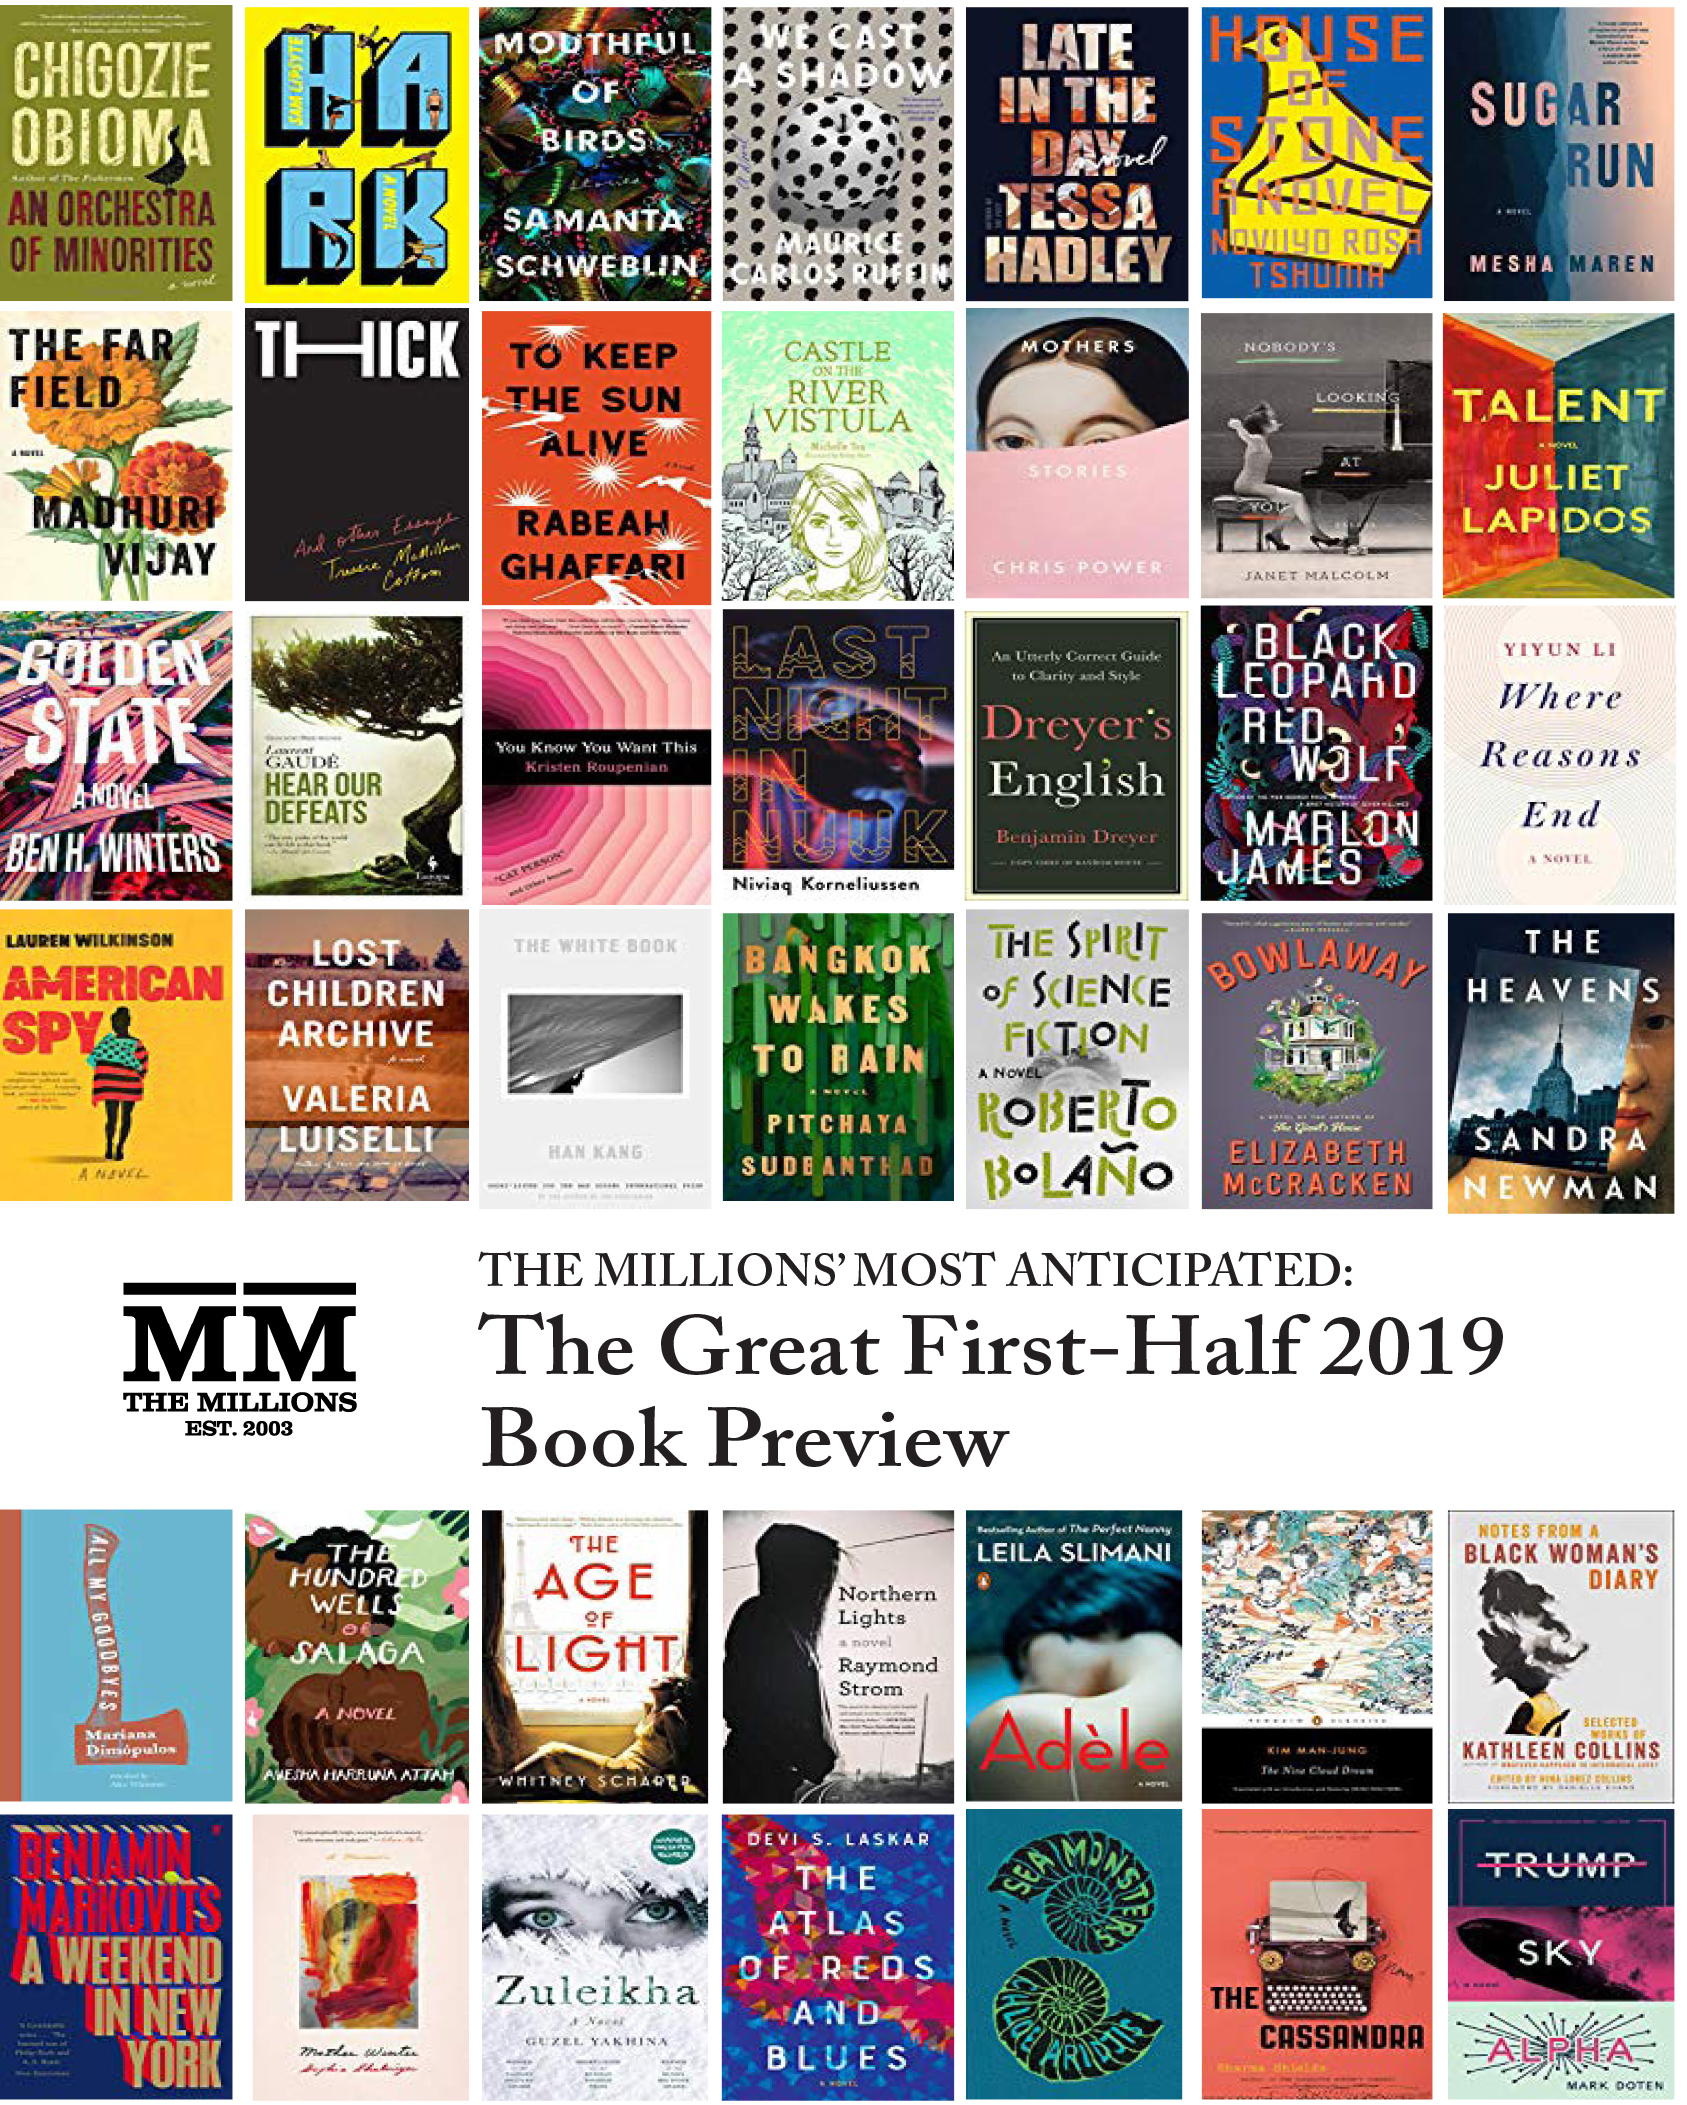 Most Anticipated The Great First-Half 2019 Book Preview